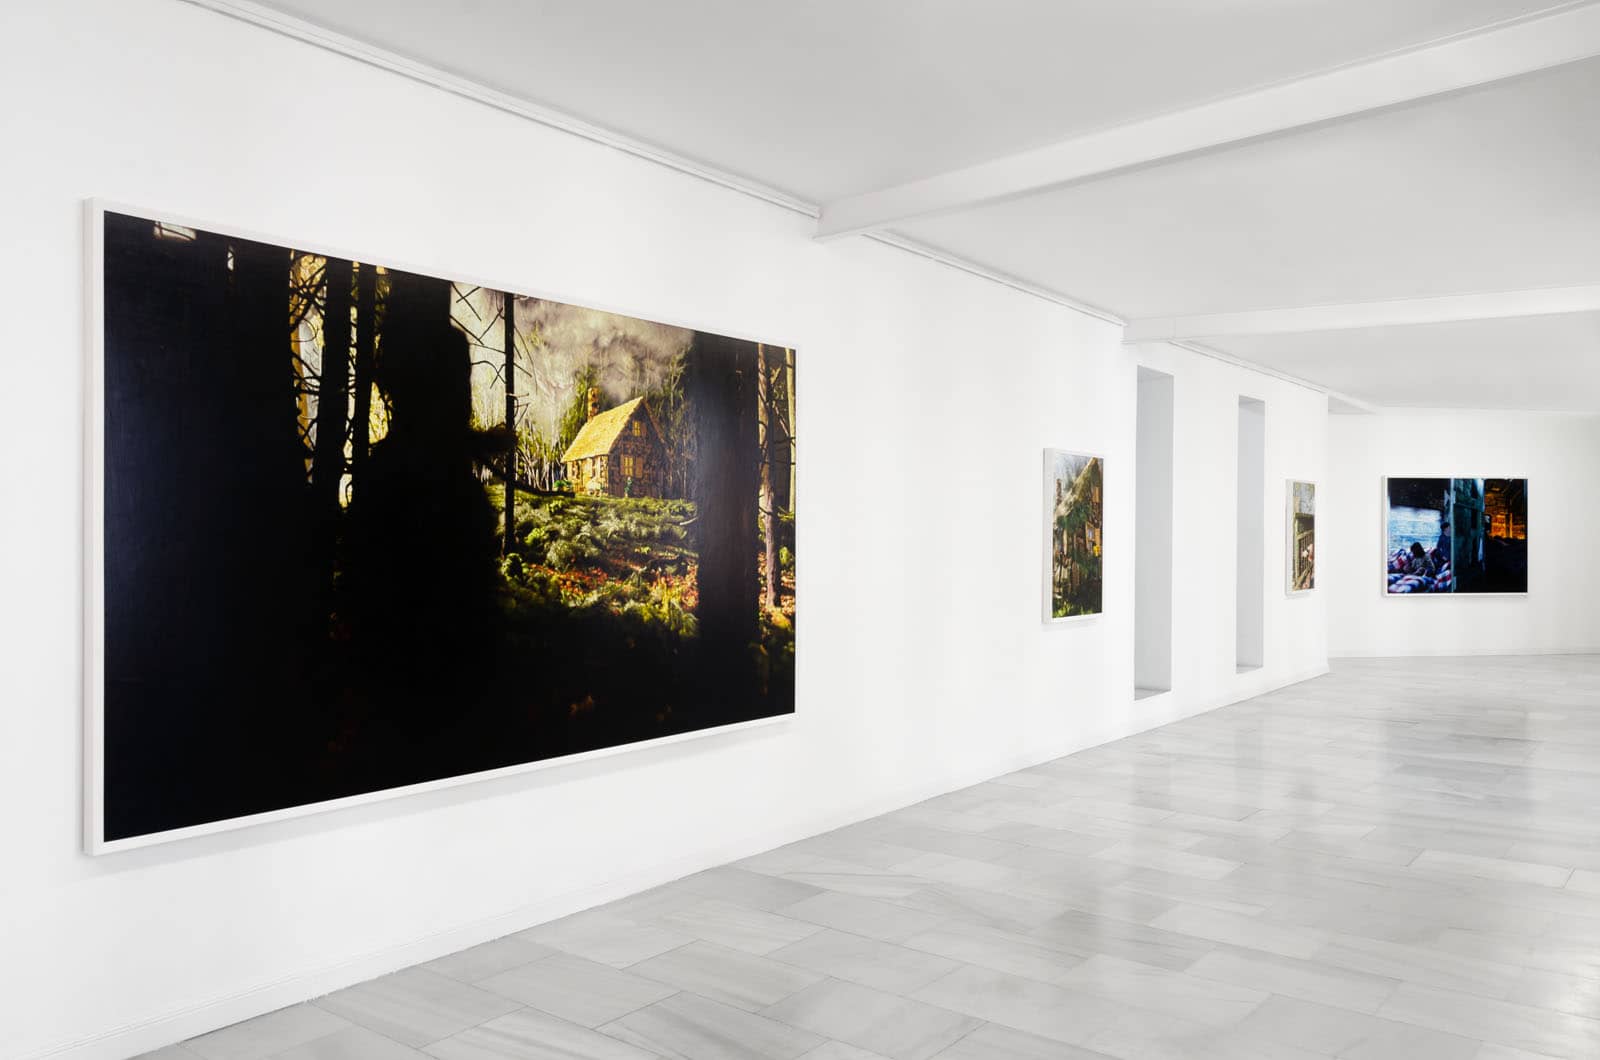 Exhibition view of Philipp Fröhlich's solo show "Hänsel y Gretel" at Juana de Aizpuru gallery in Madrid, 2019. Four oil paintings showing scenes from the fairy tale by the brothers Grimm are seen in the photography.